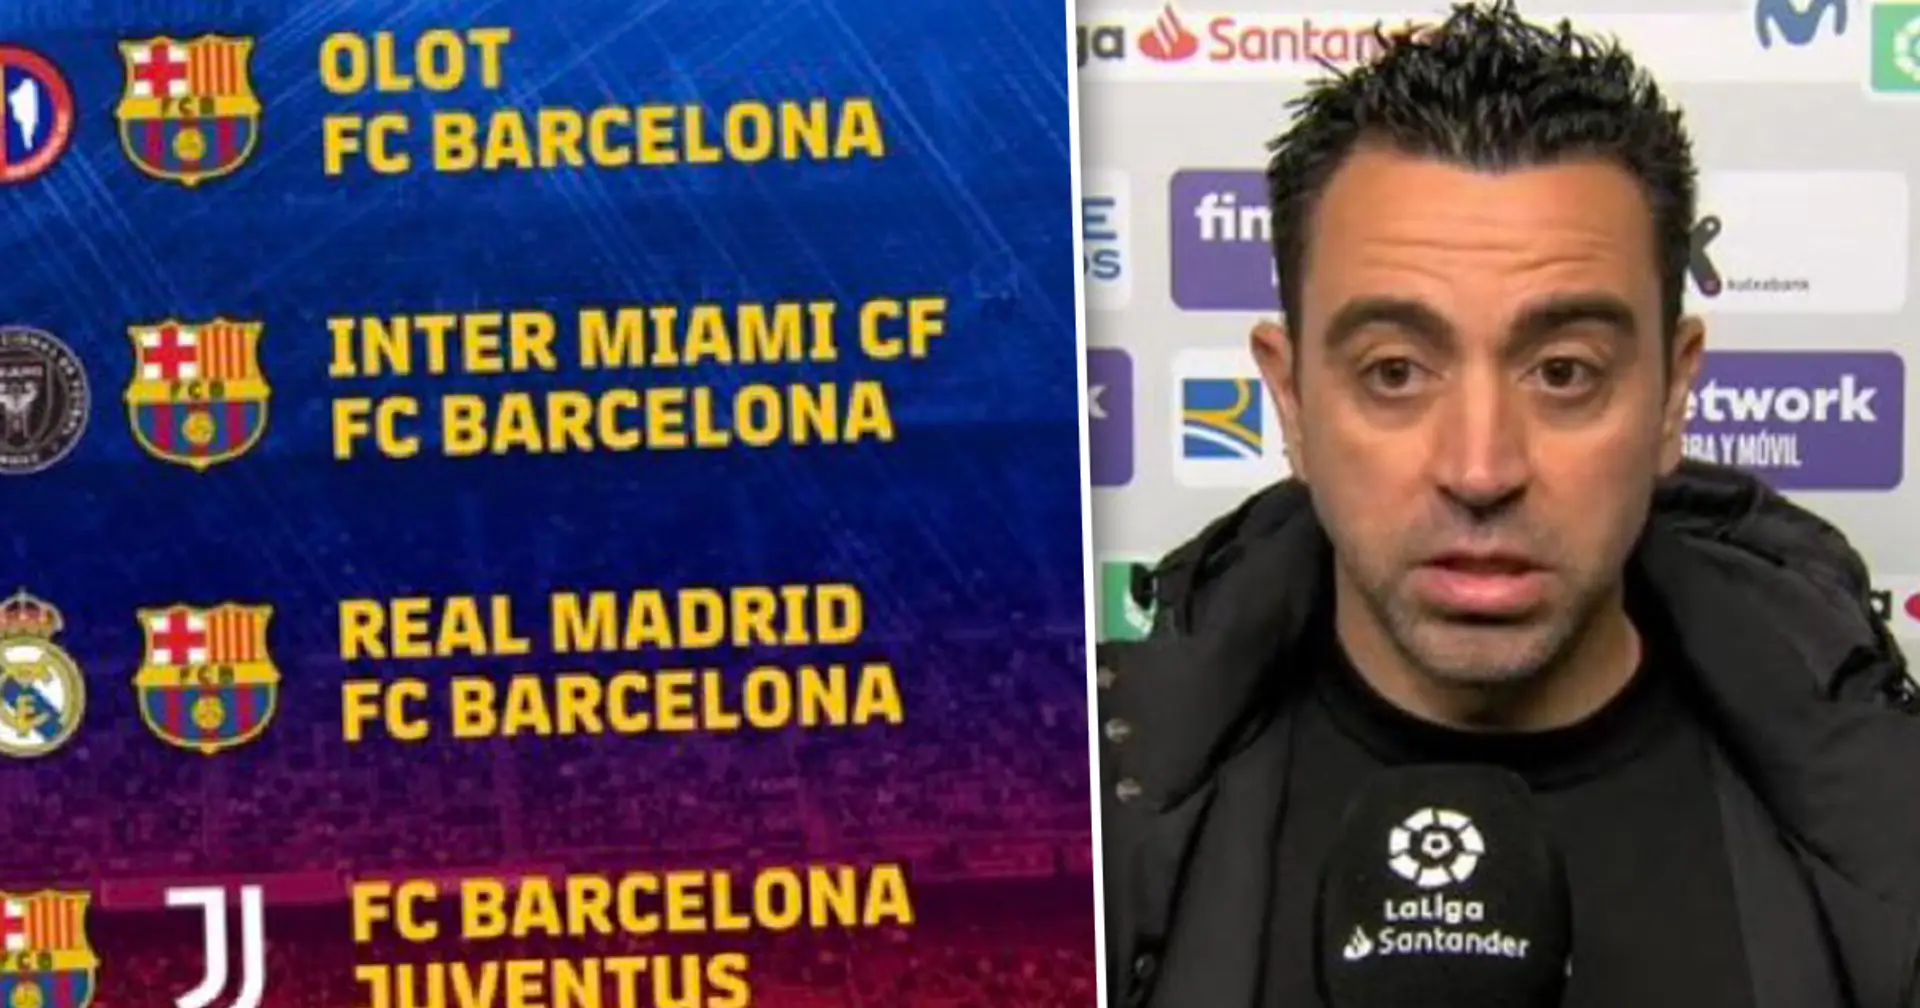 Real Madrid and 5 more Barca opponents in pre-season confirmed